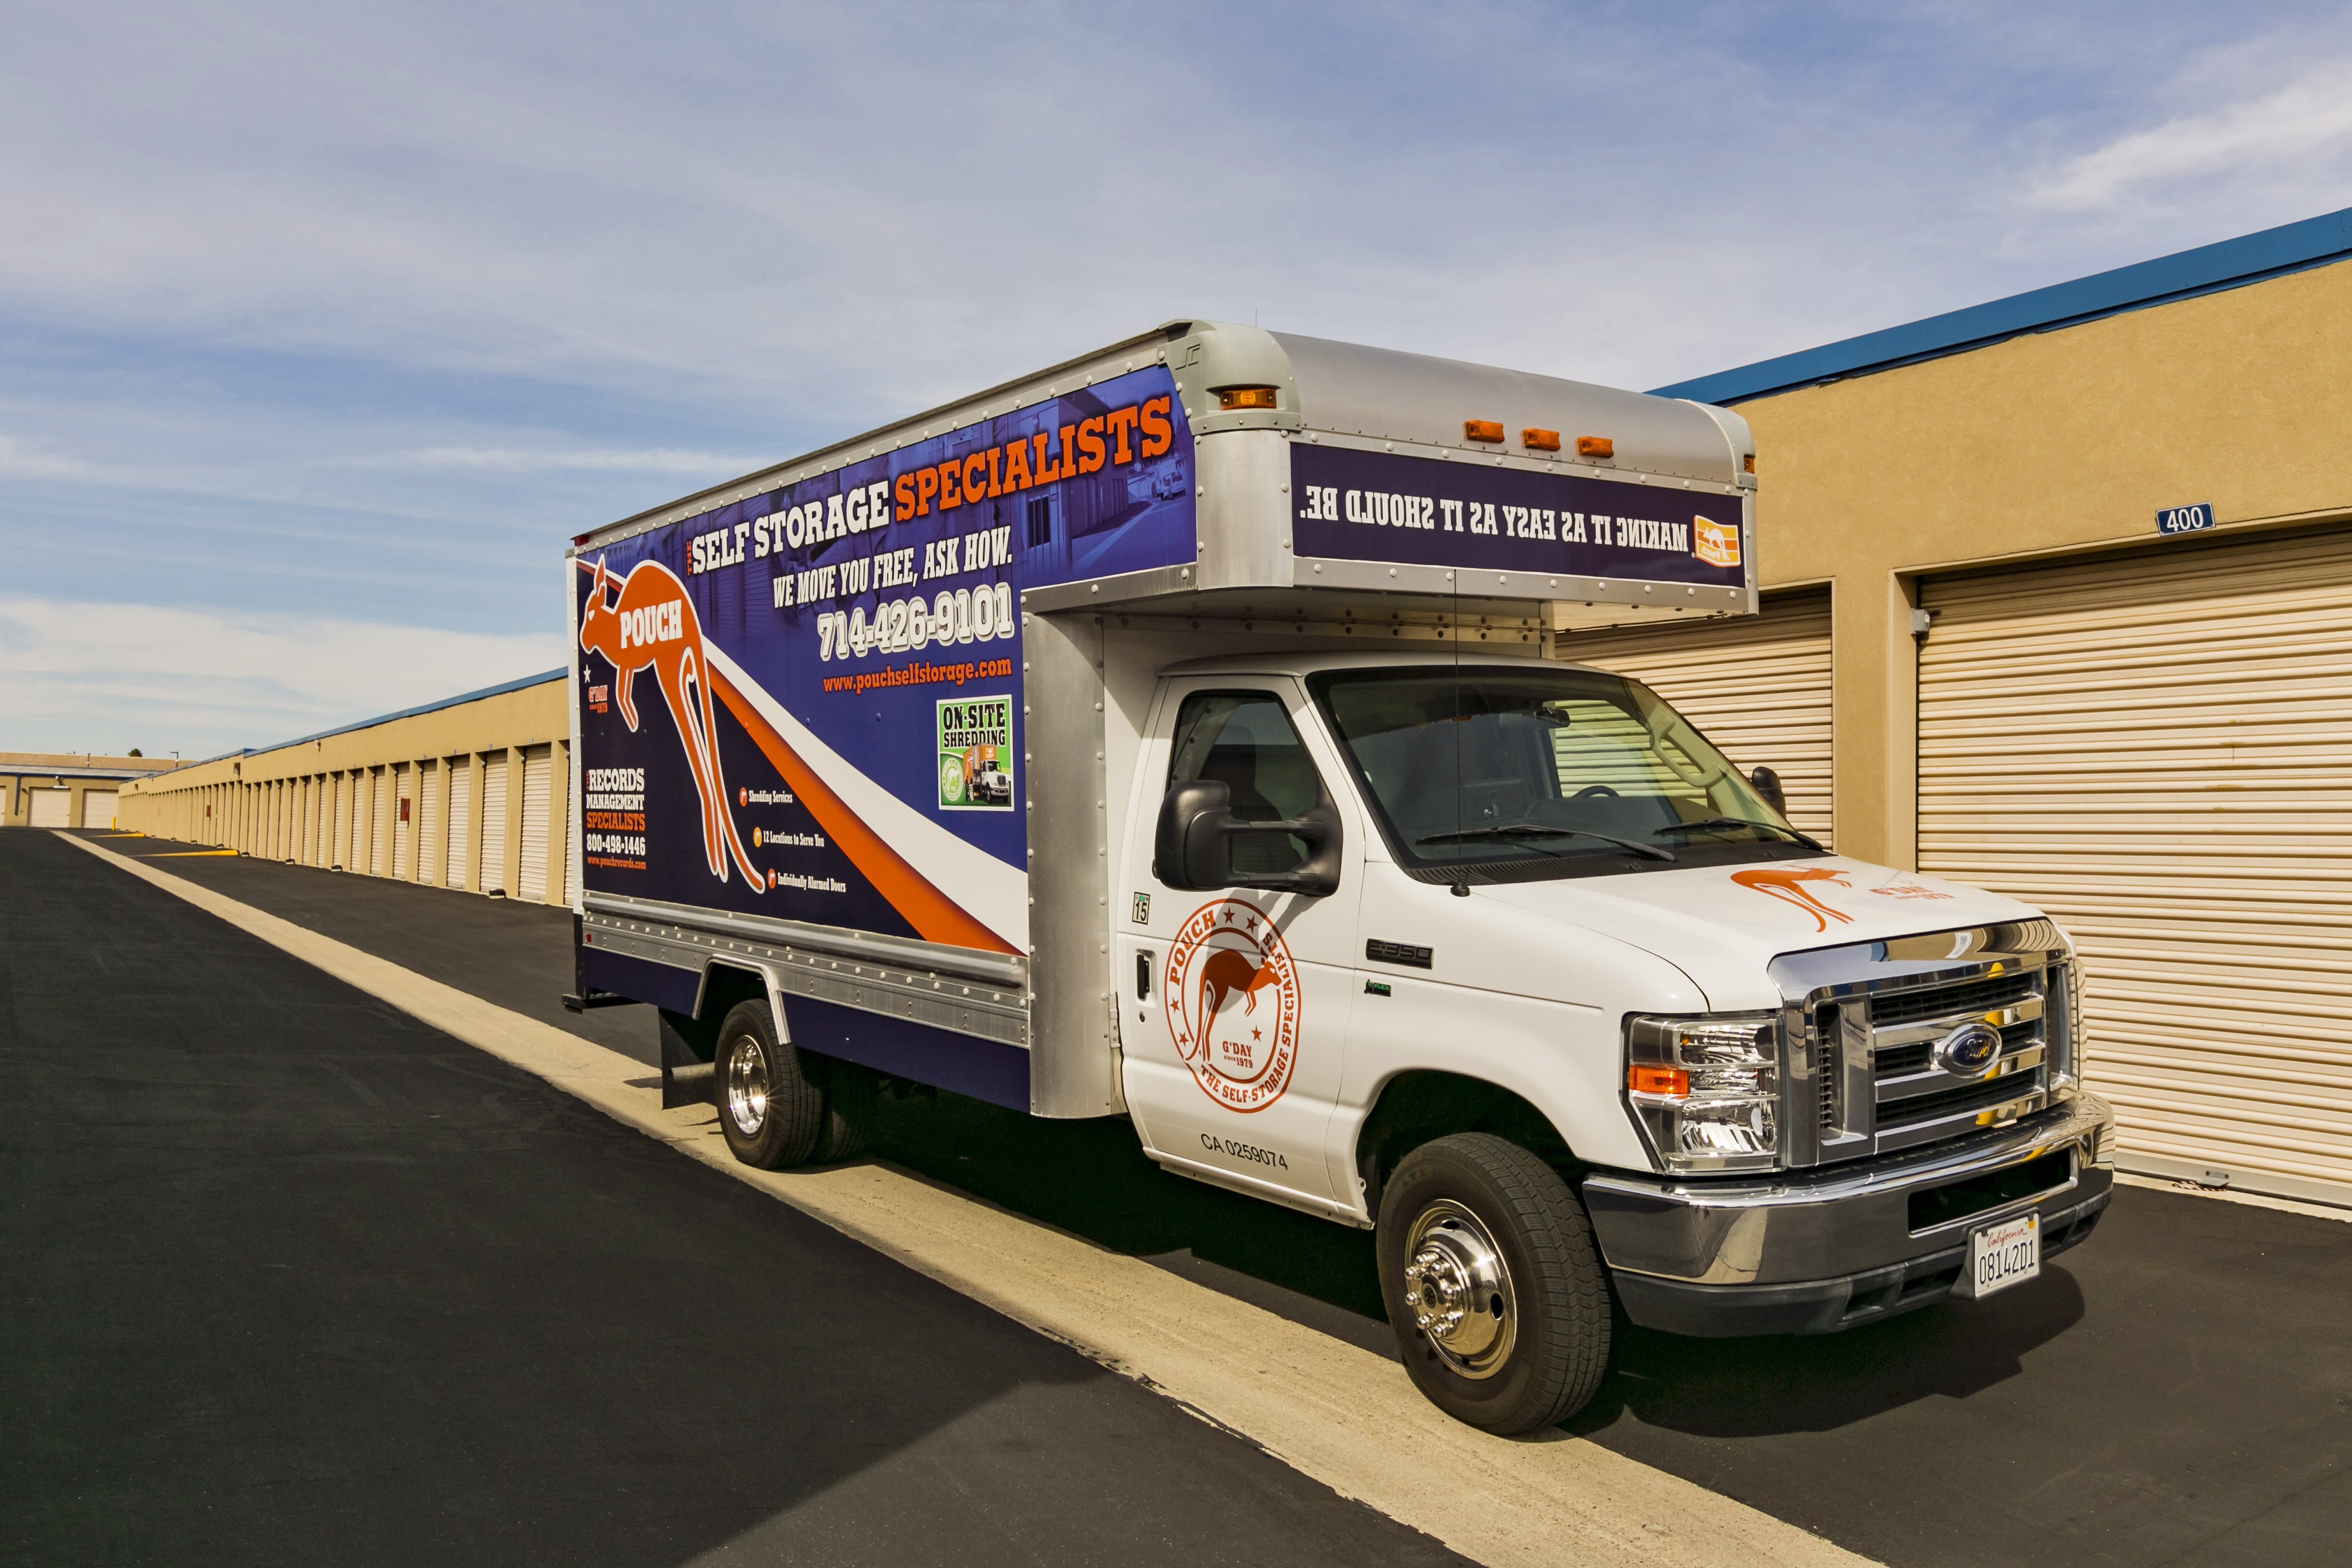 Pouch Self Storage branded moving truck